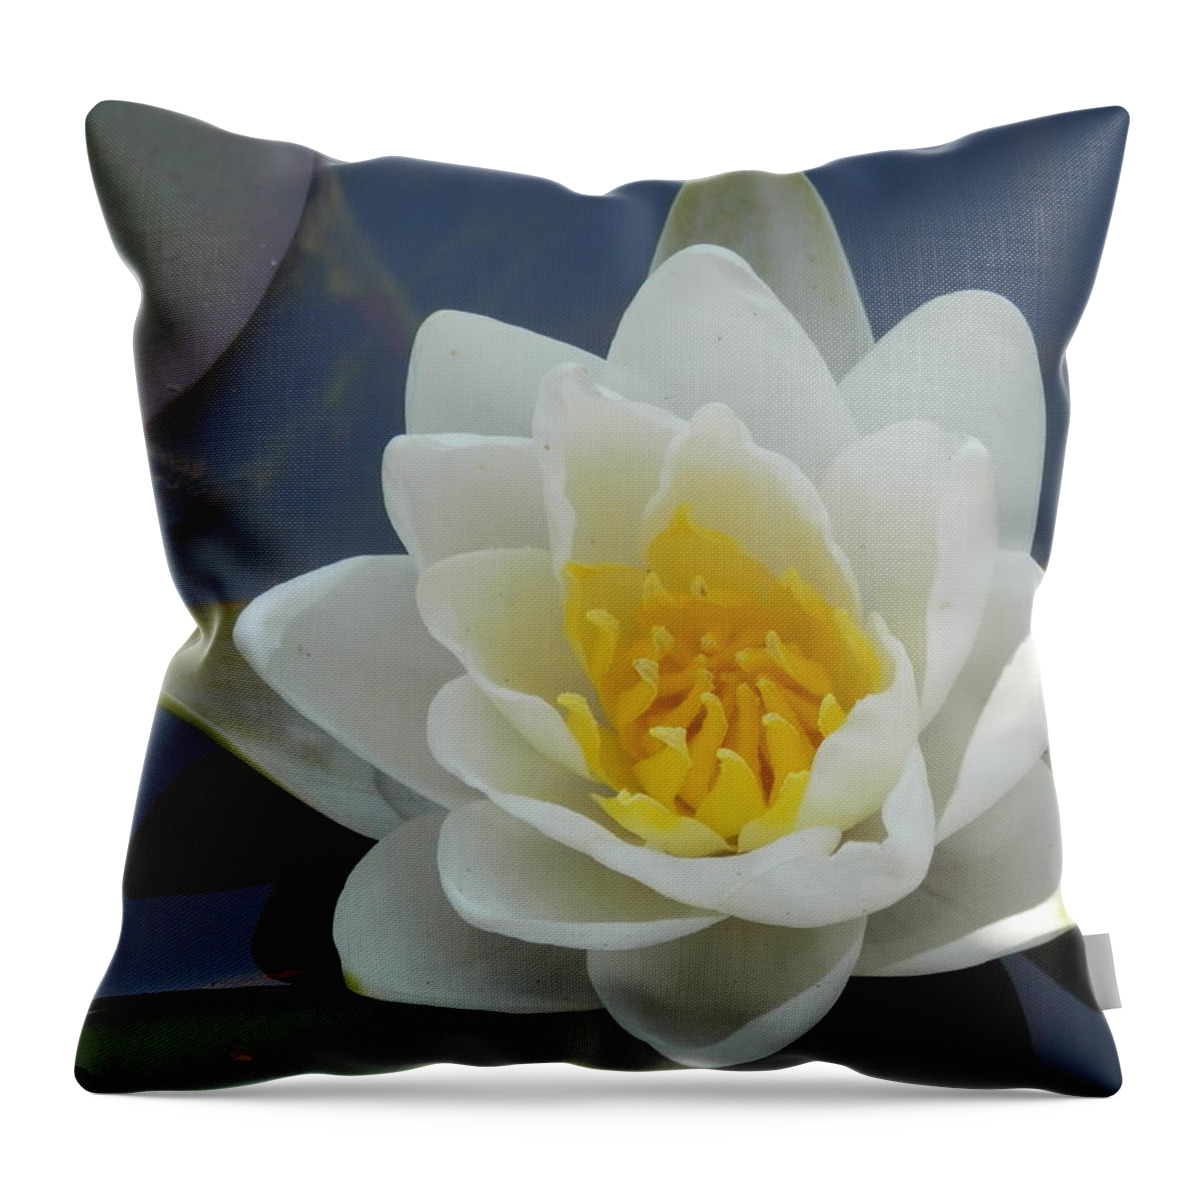 Yellow Throw Pillow featuring the photograph Water Lily 1 by Pema Hou